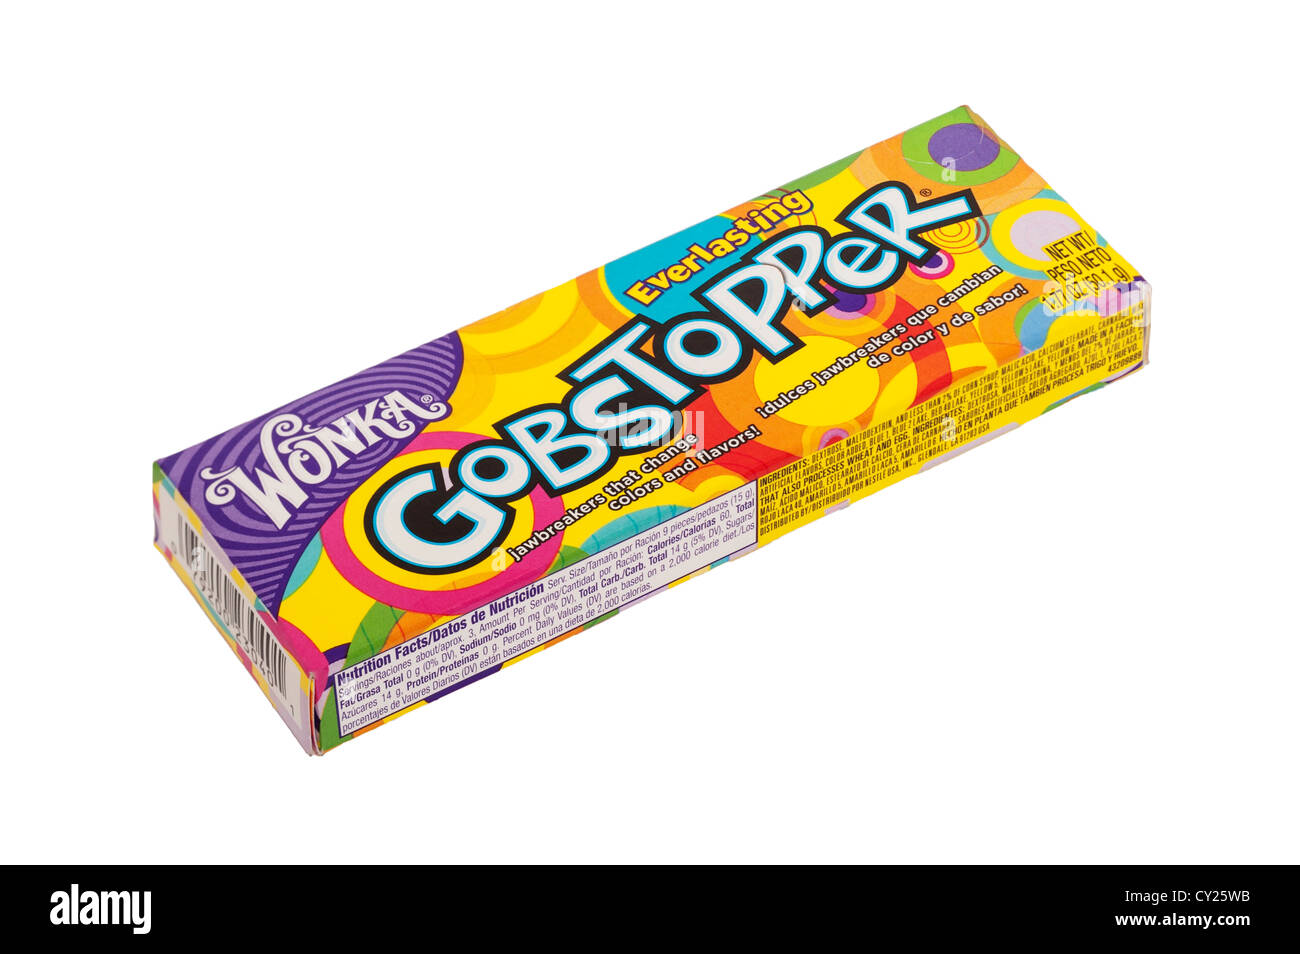 A packet of Wonka everlasting gobstoppers sweets candy on a white background Stock Photo